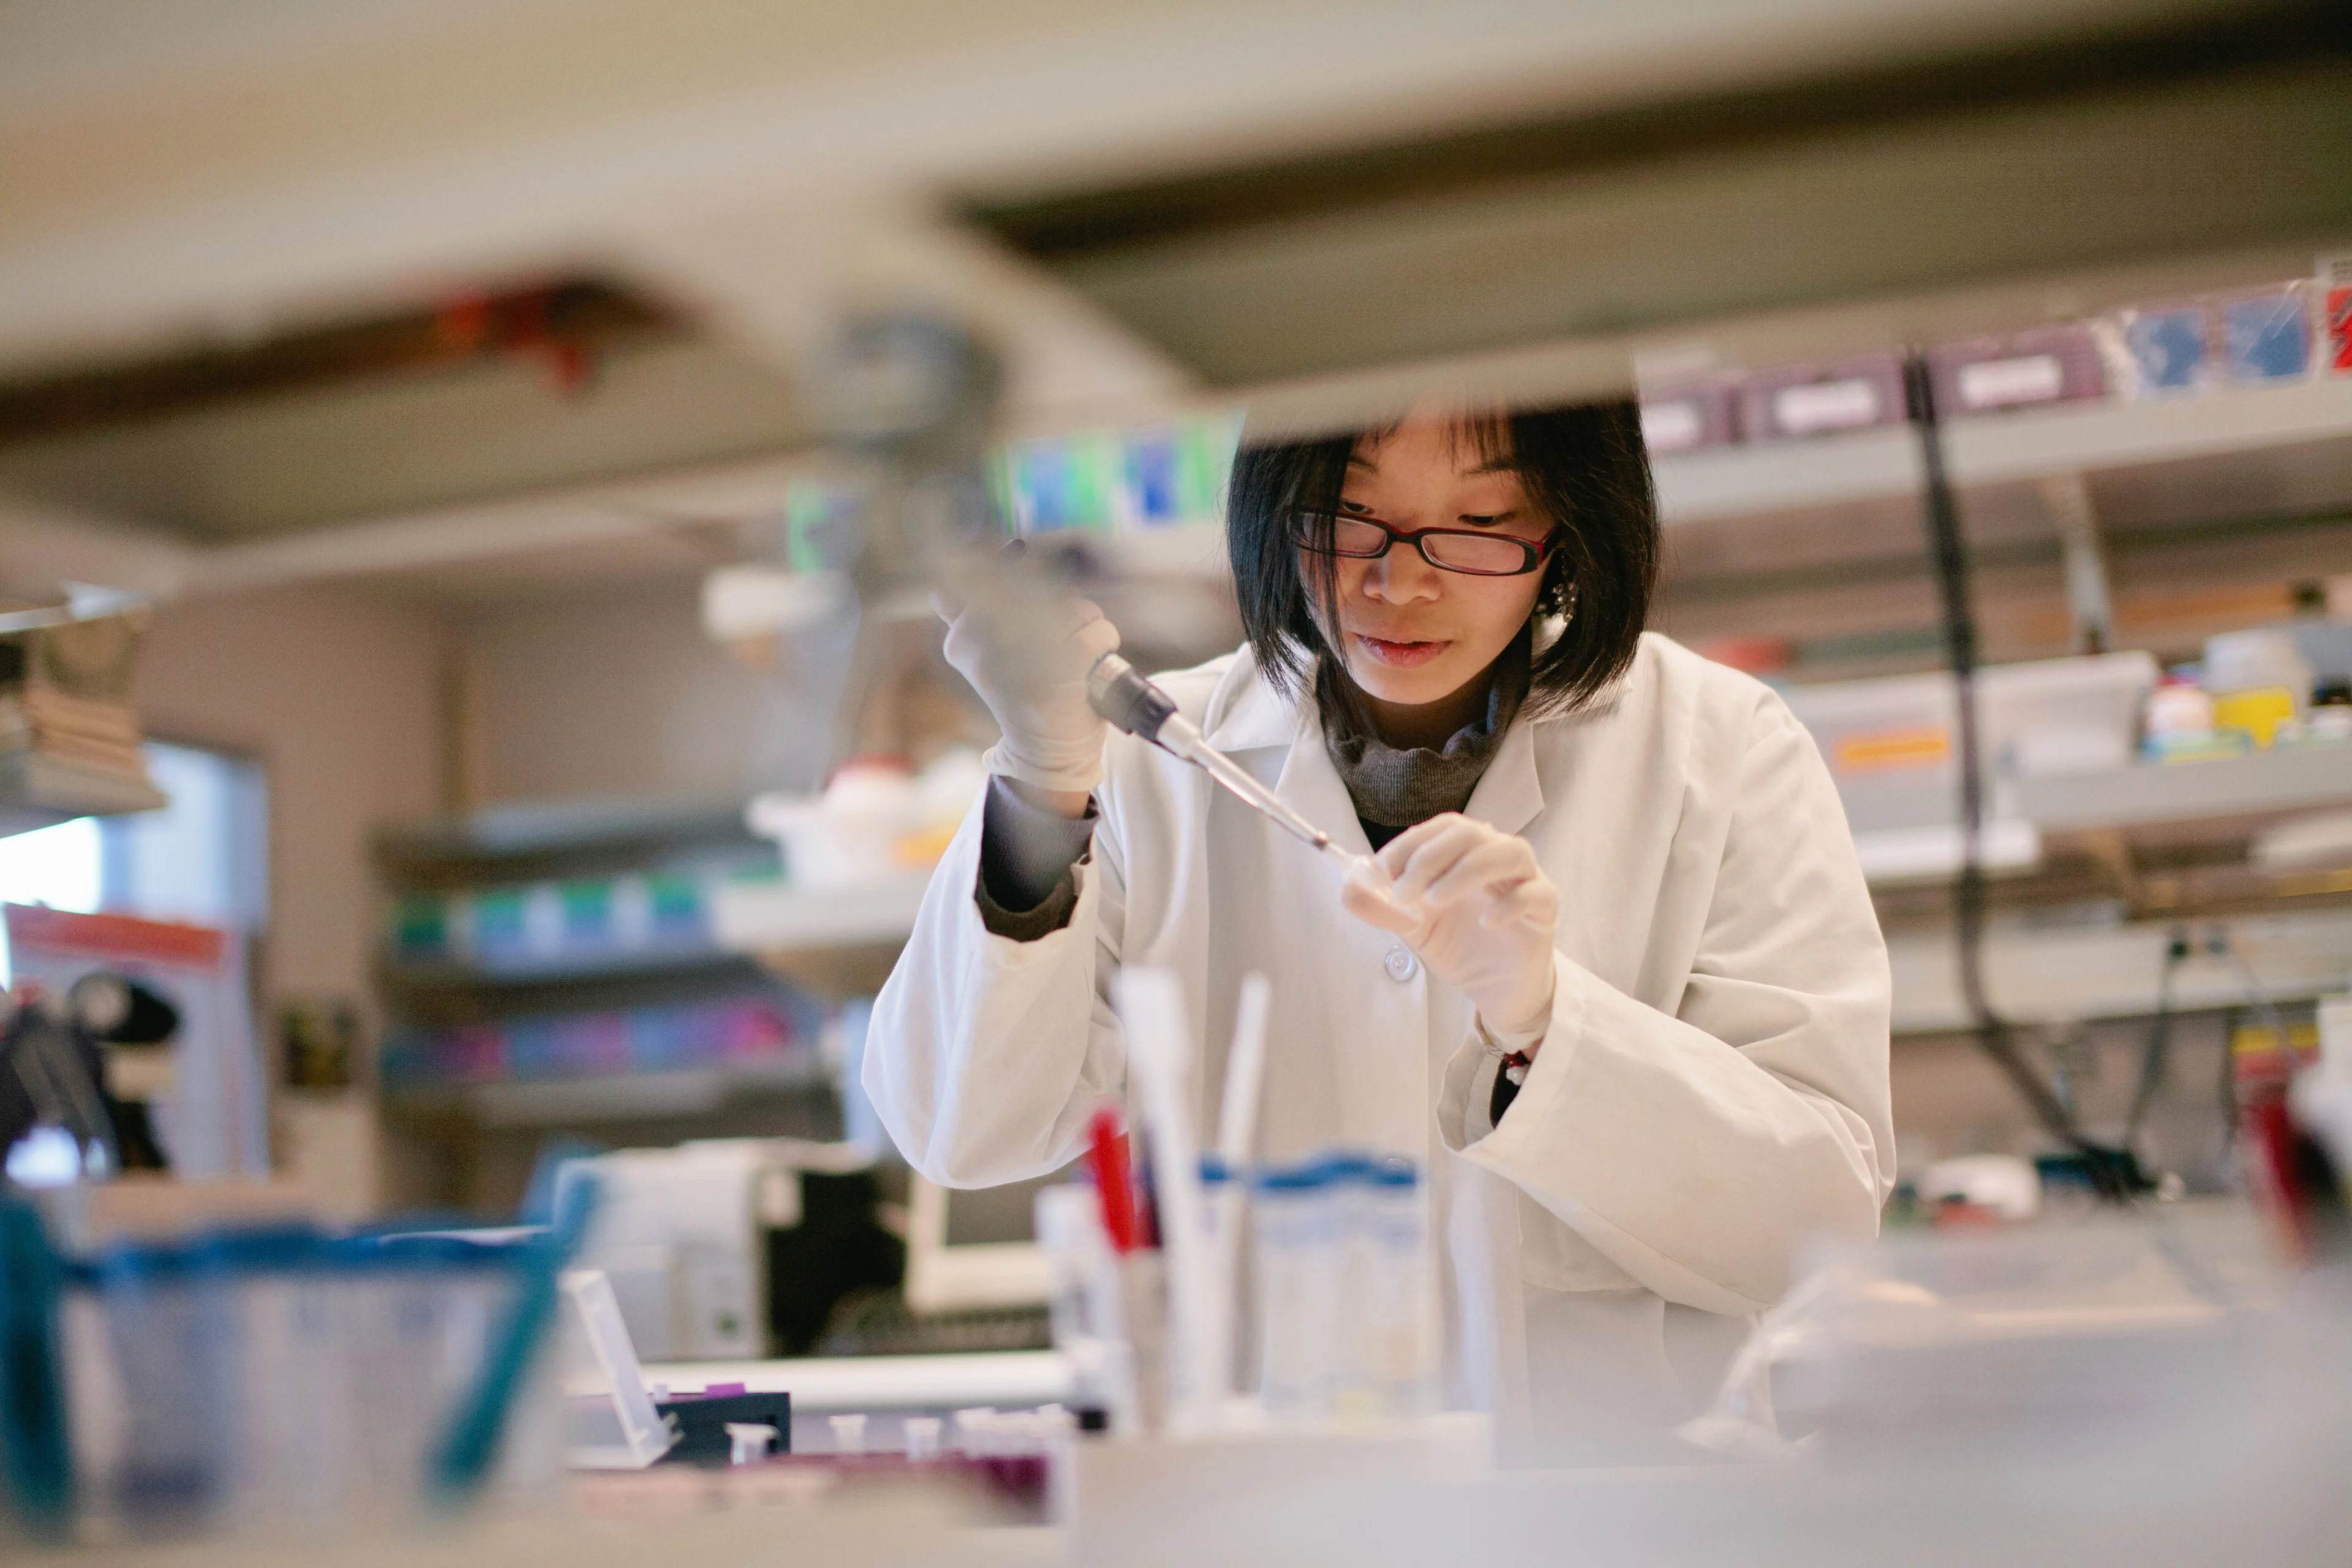 Descriptive image showing a woman in a lab coat working on pharmaceutical production.